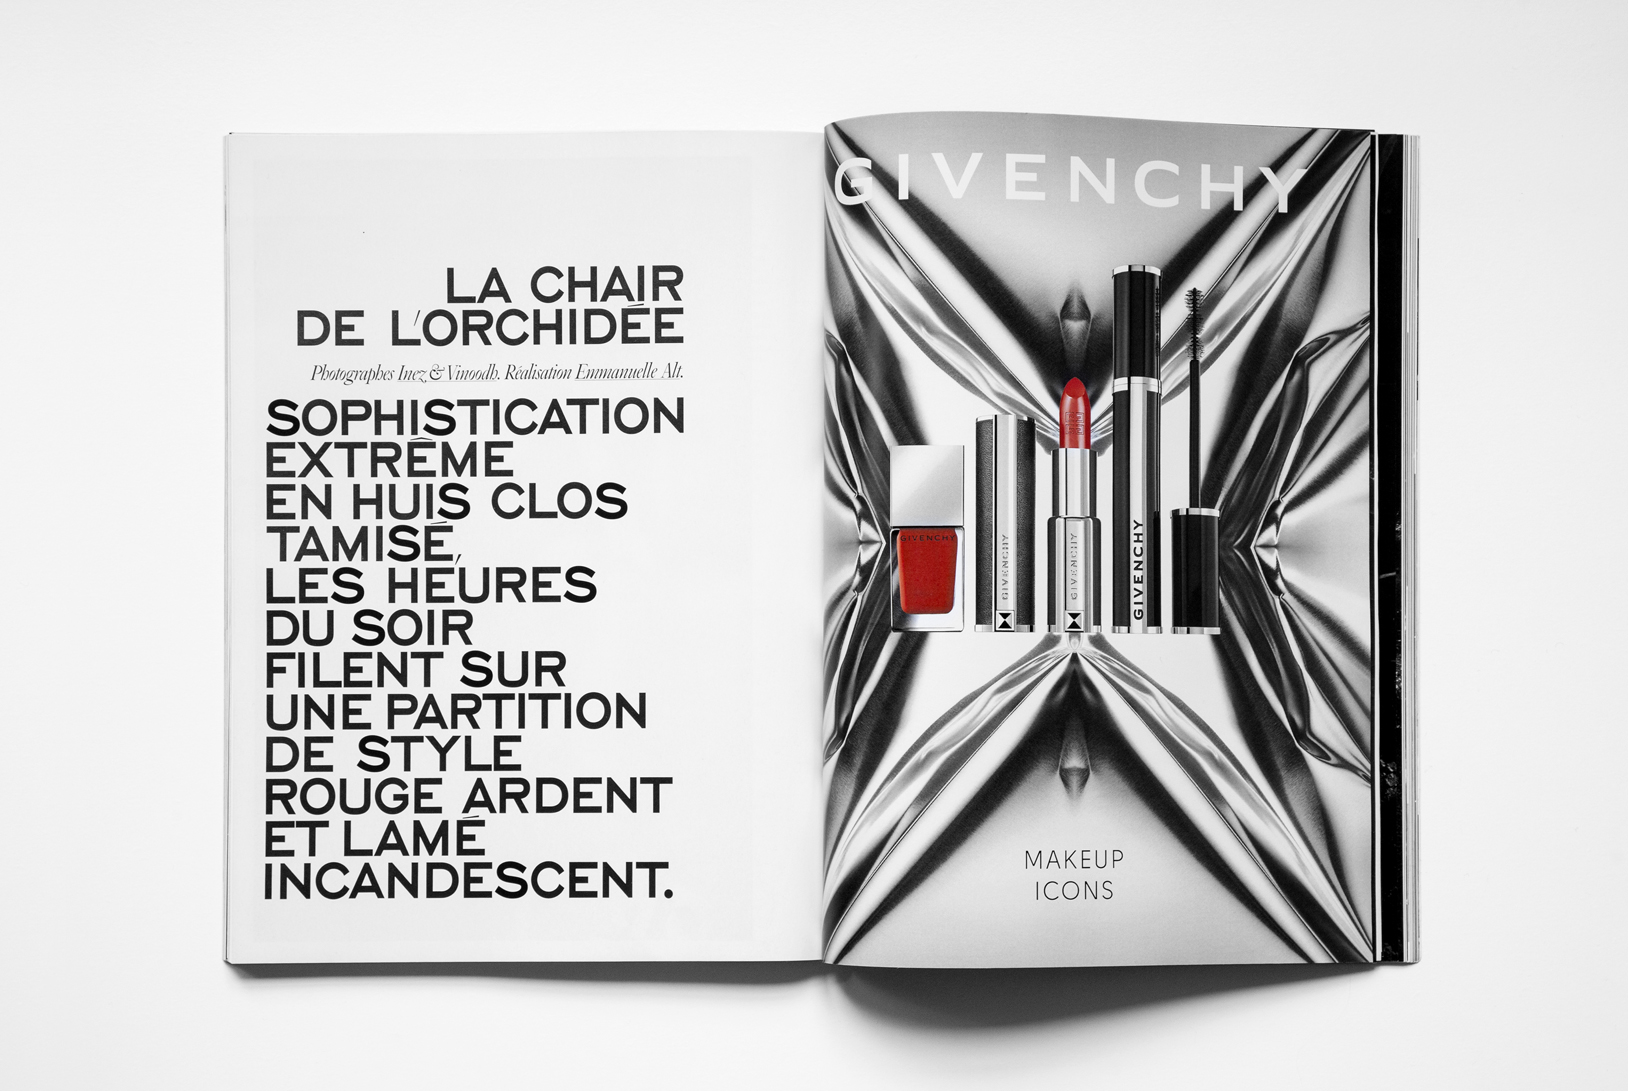 CARLA COSTE / Art Director & Image Maker GIVENCHY – Silver Collection